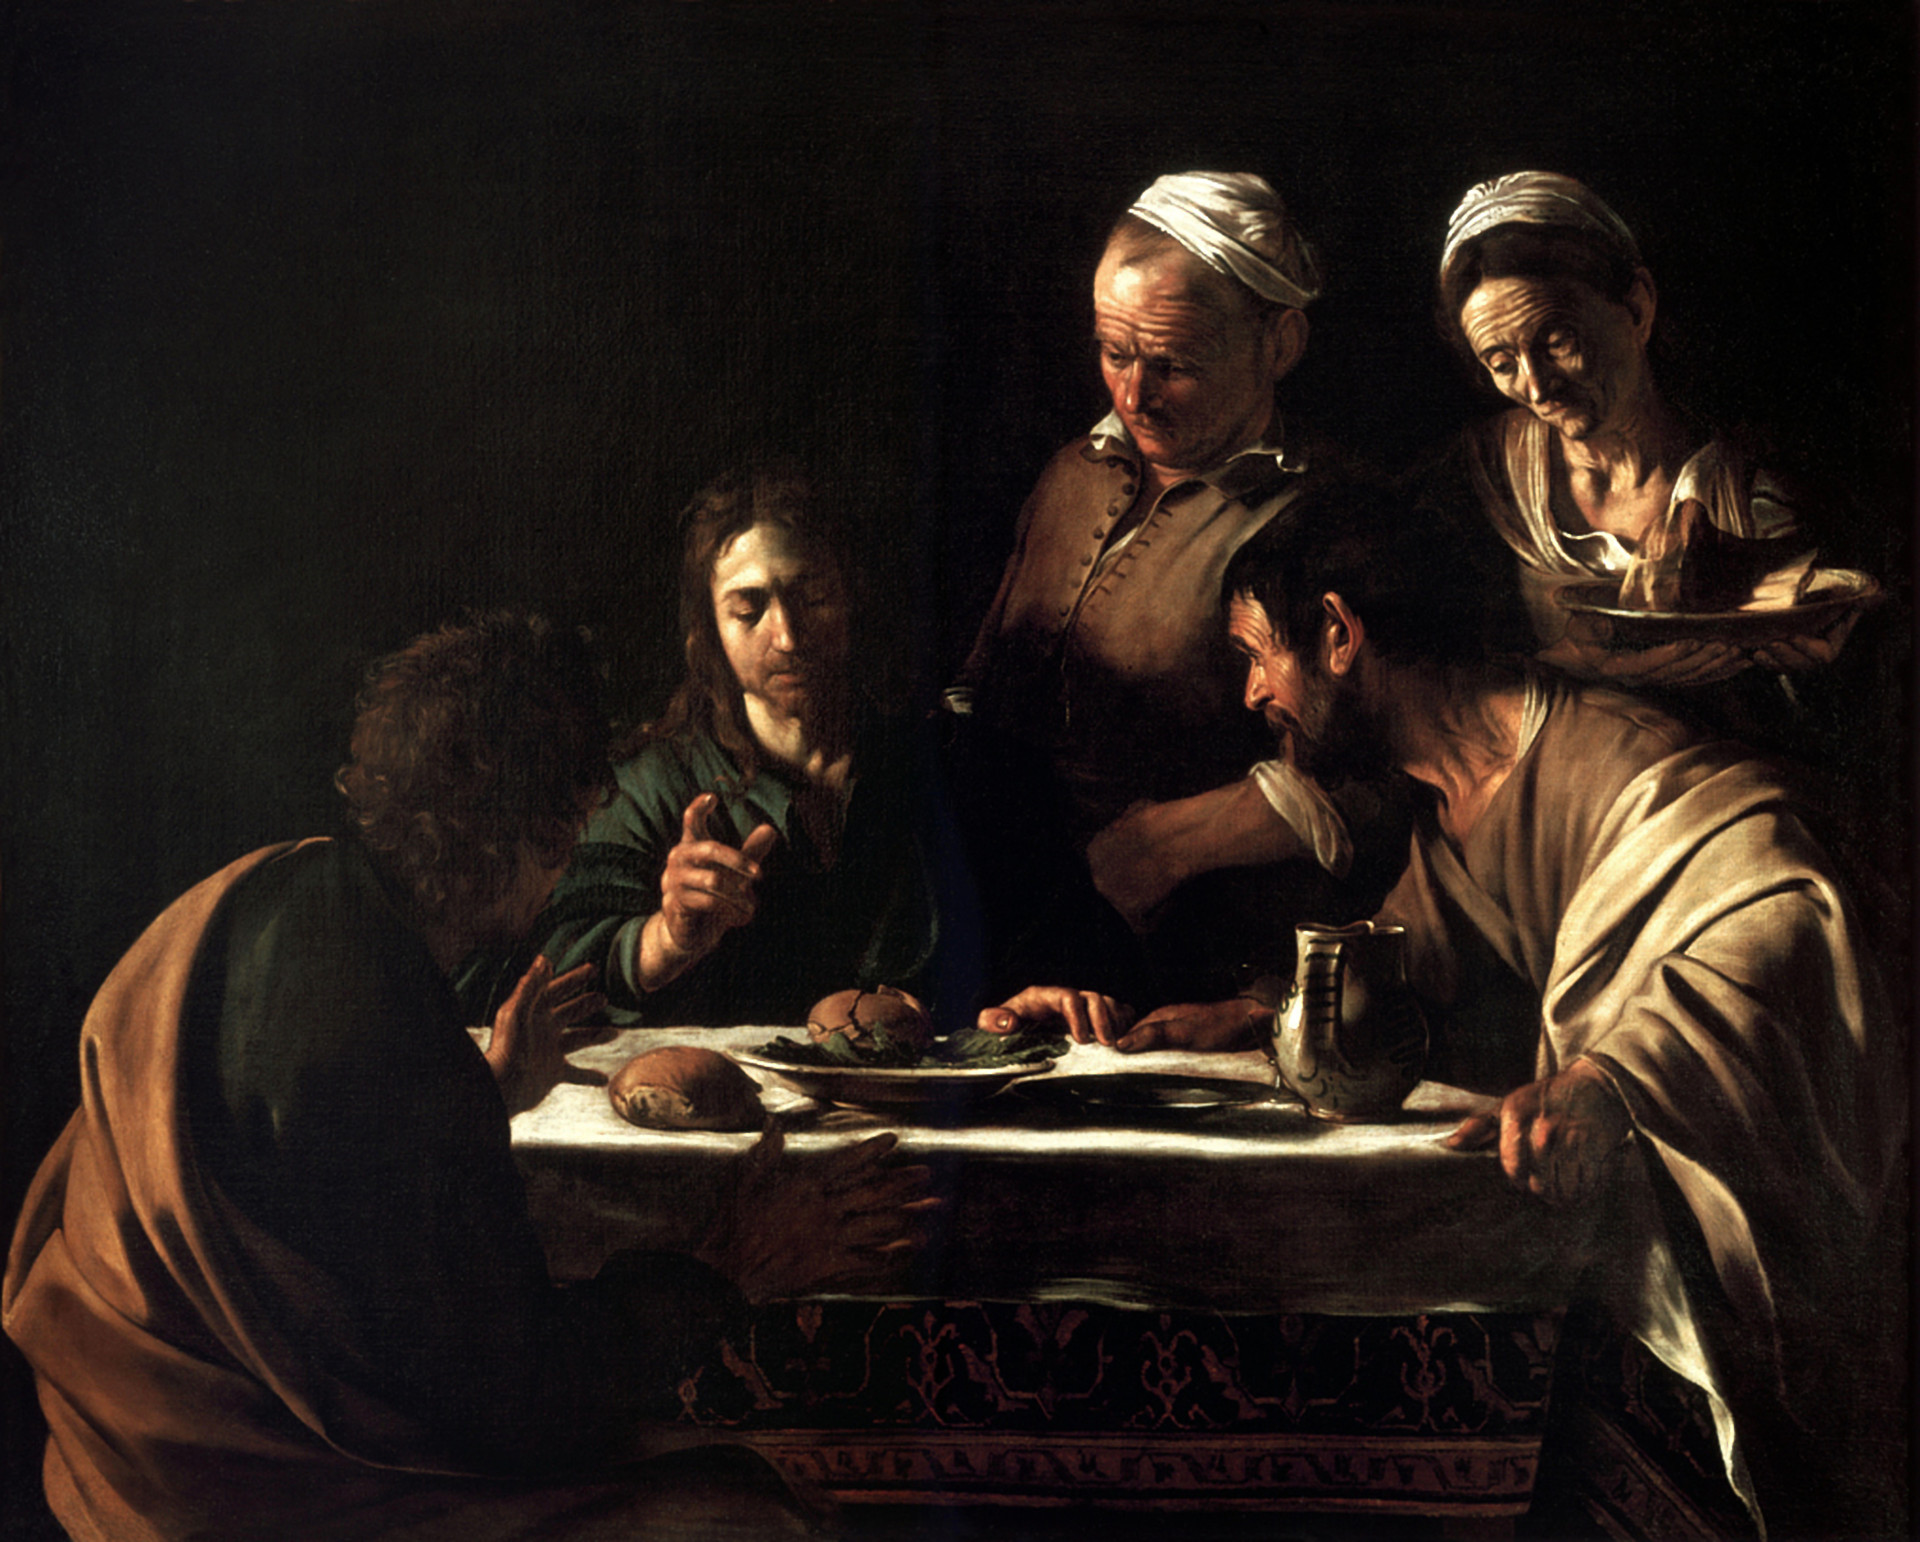 <p>Painted in 1601 by Caravaggio, this artwork depicts Jesus revealing himself following his resurrection. Filled with religious symbolism, it features grapes symbolizing Christ's blood and a pomegranate representing his resurrection.</p>